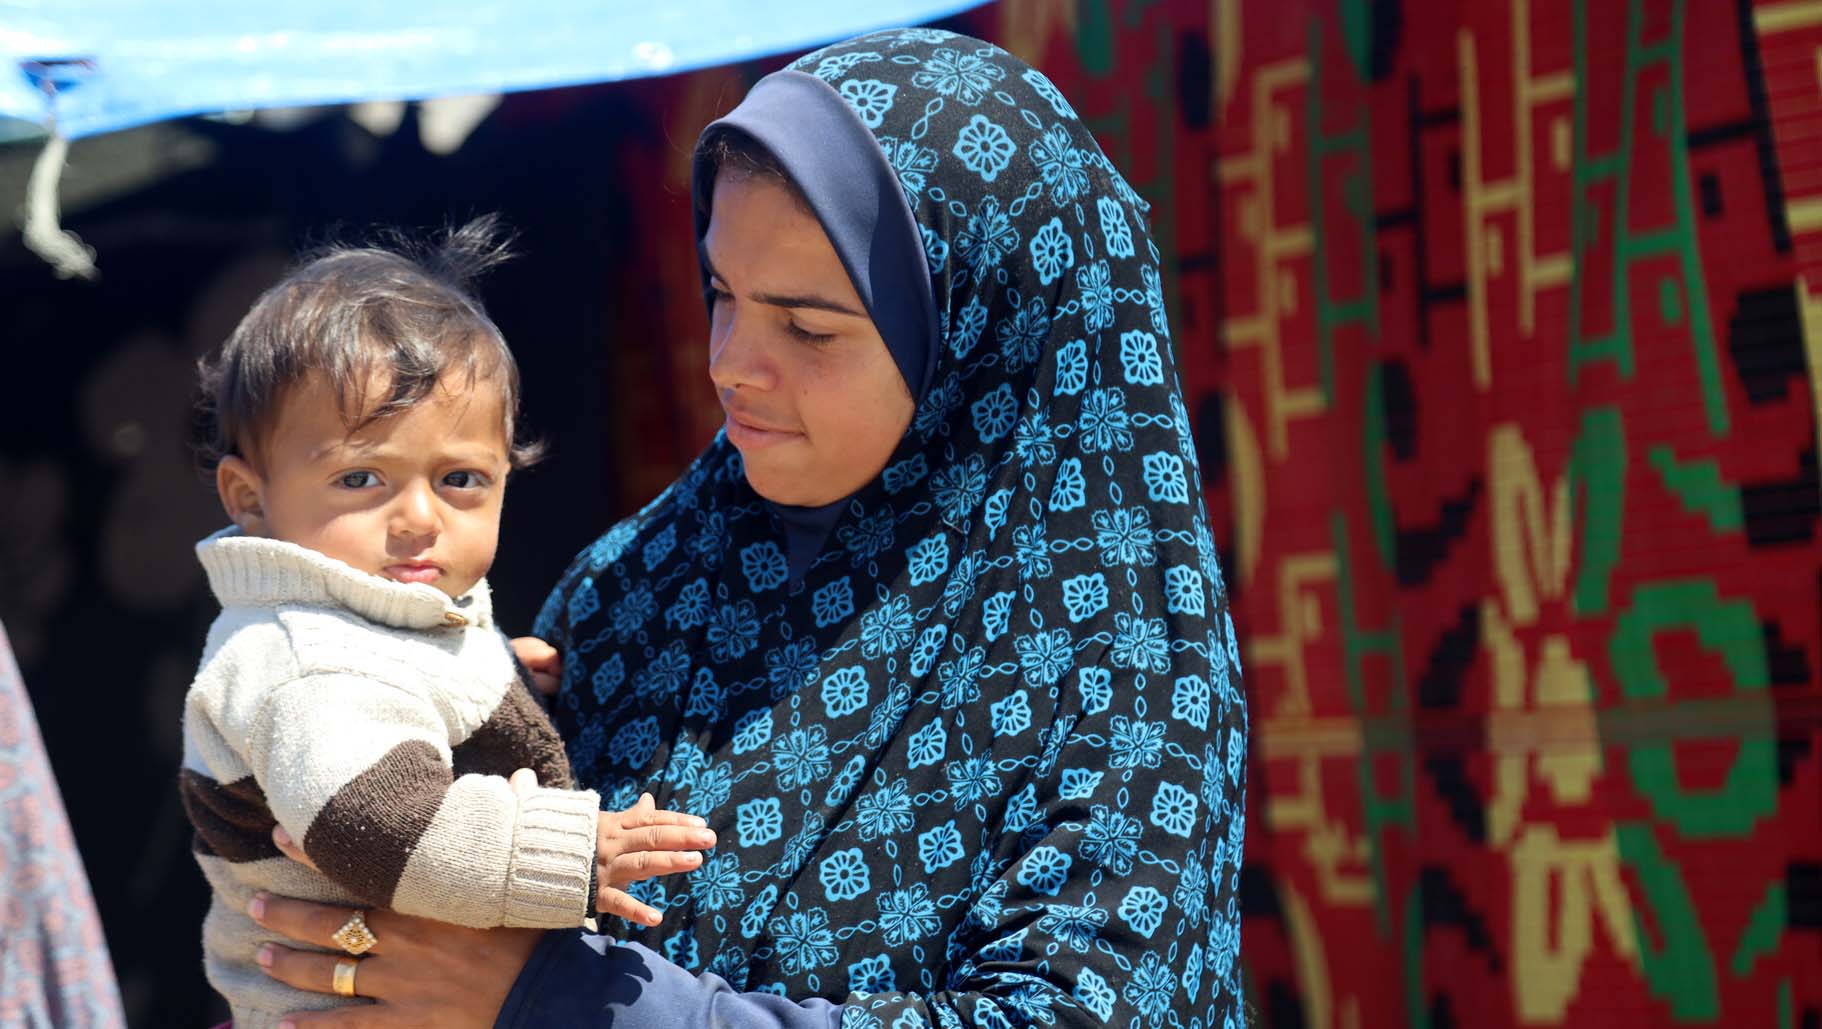 A woman wearing a blue hijab stands holding a young child in her arms.